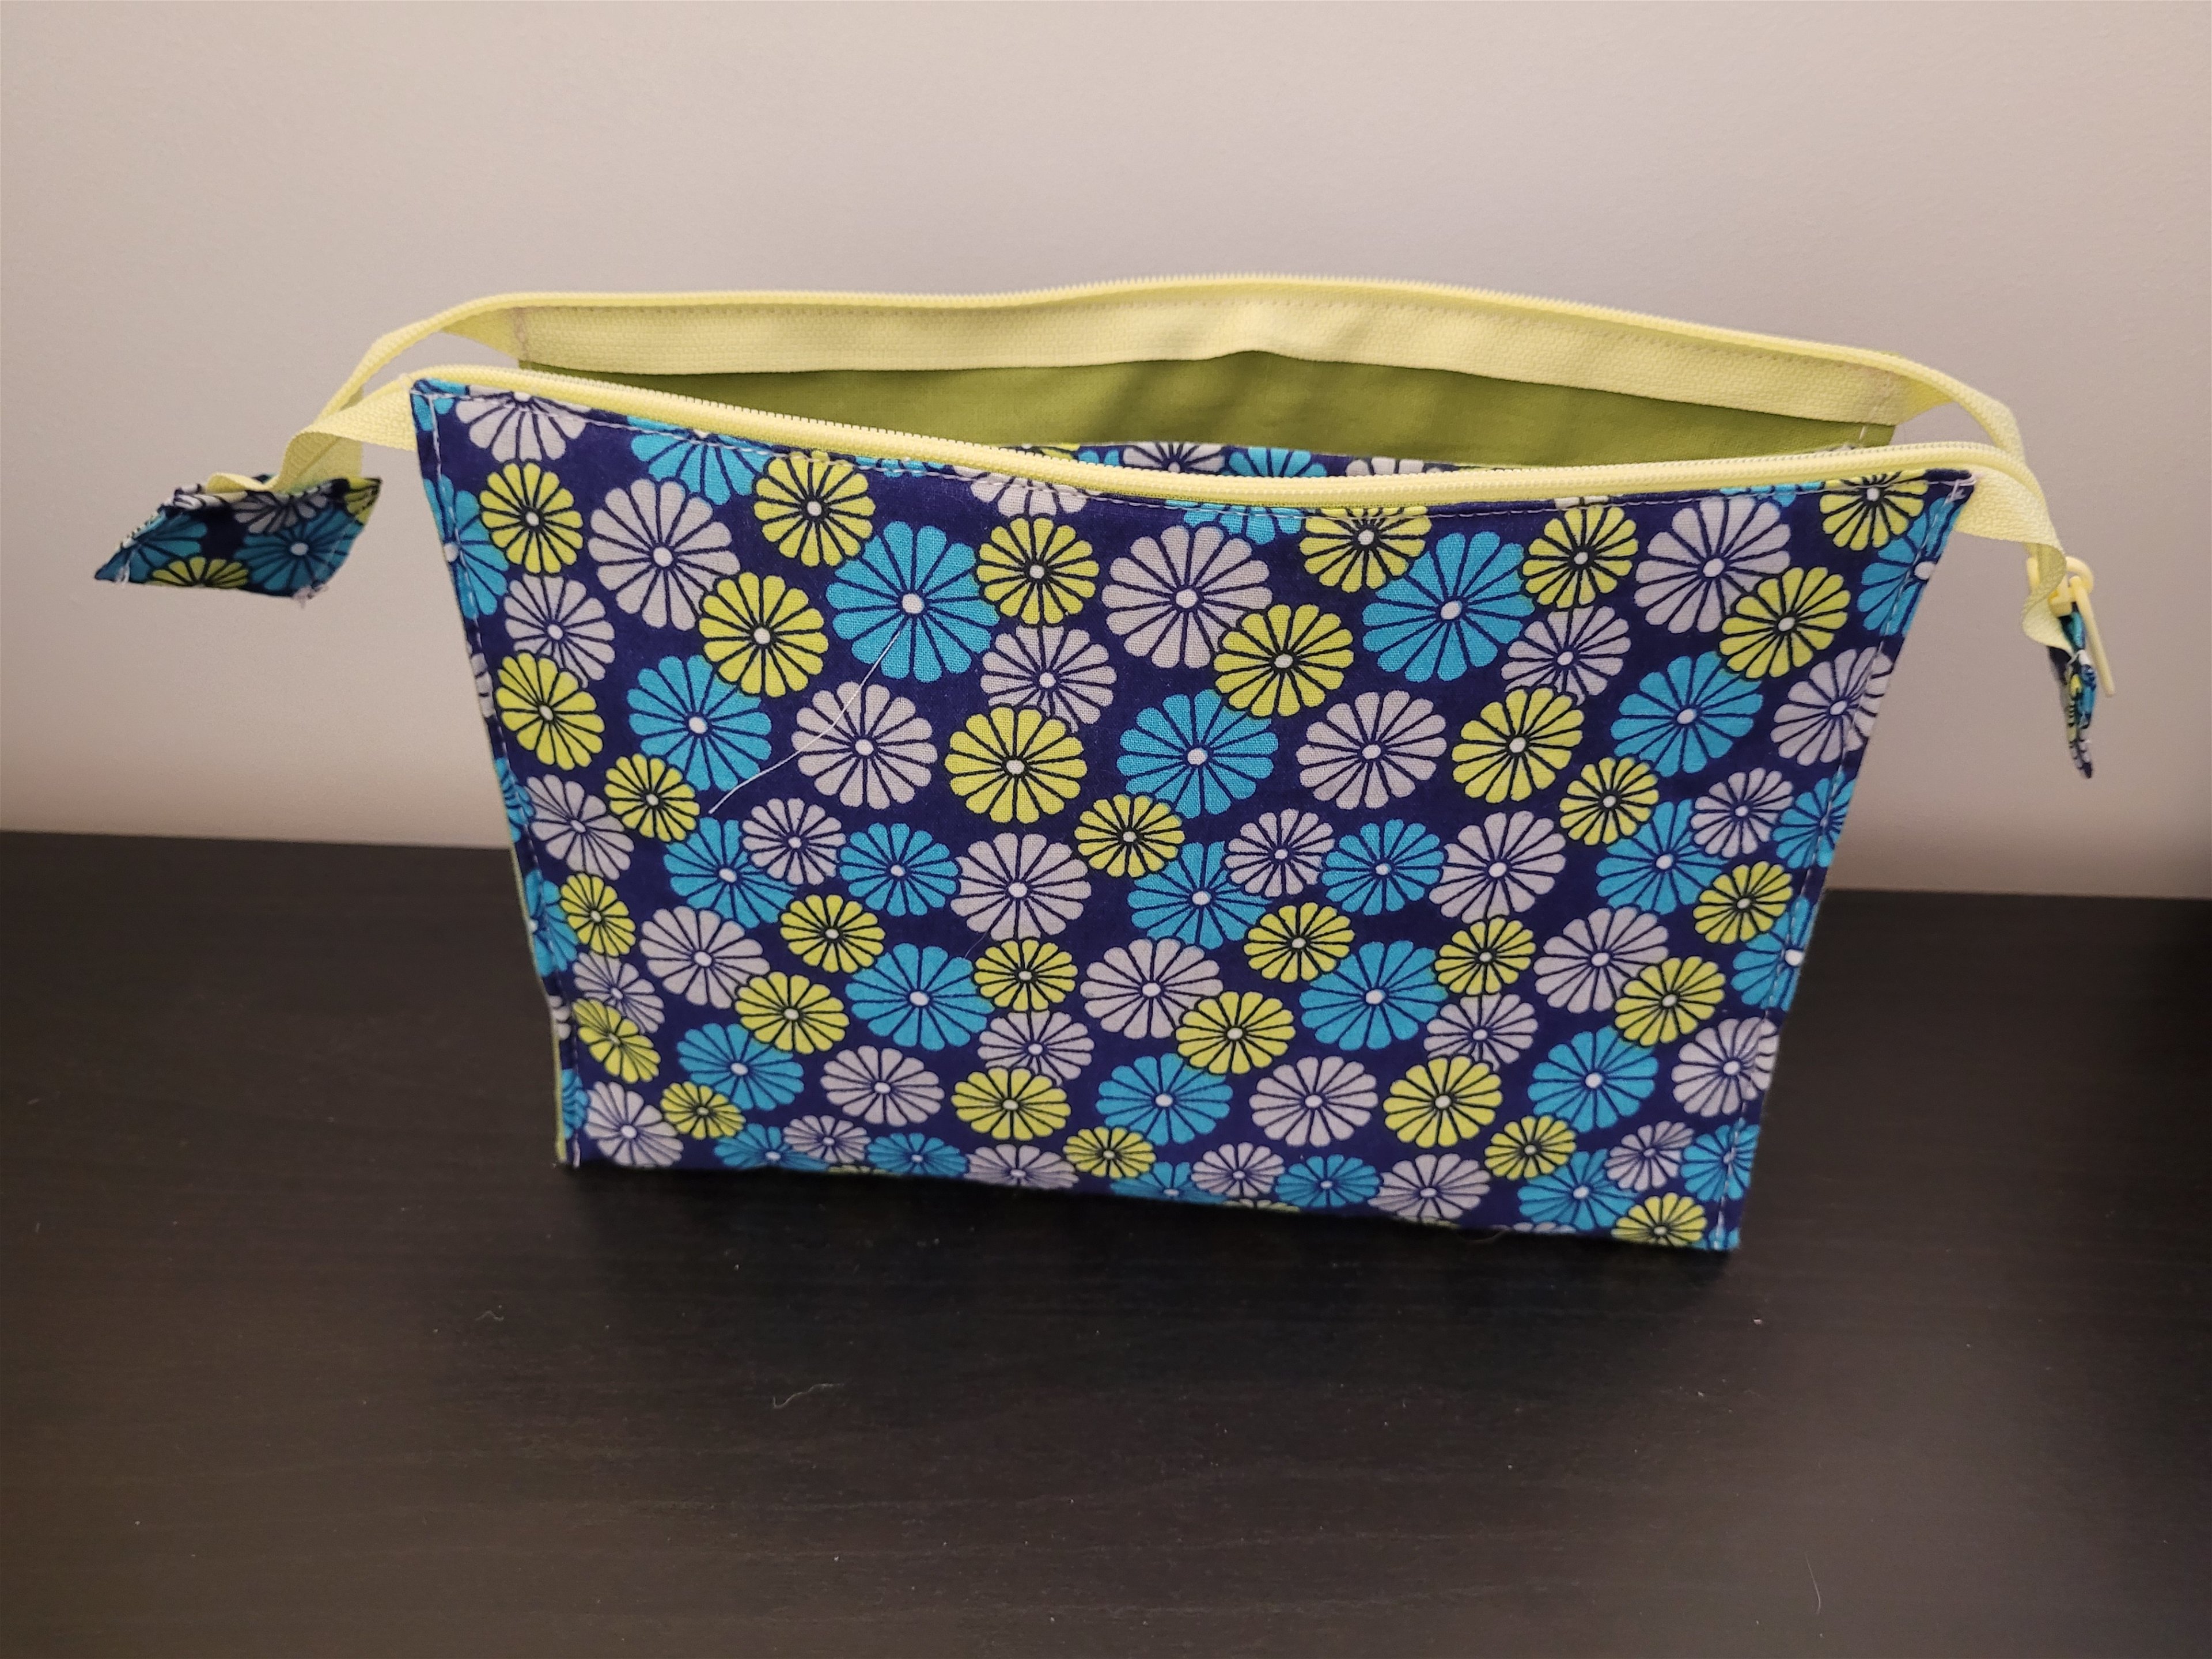 Sew A Zipped Pouch with Centre Pocket